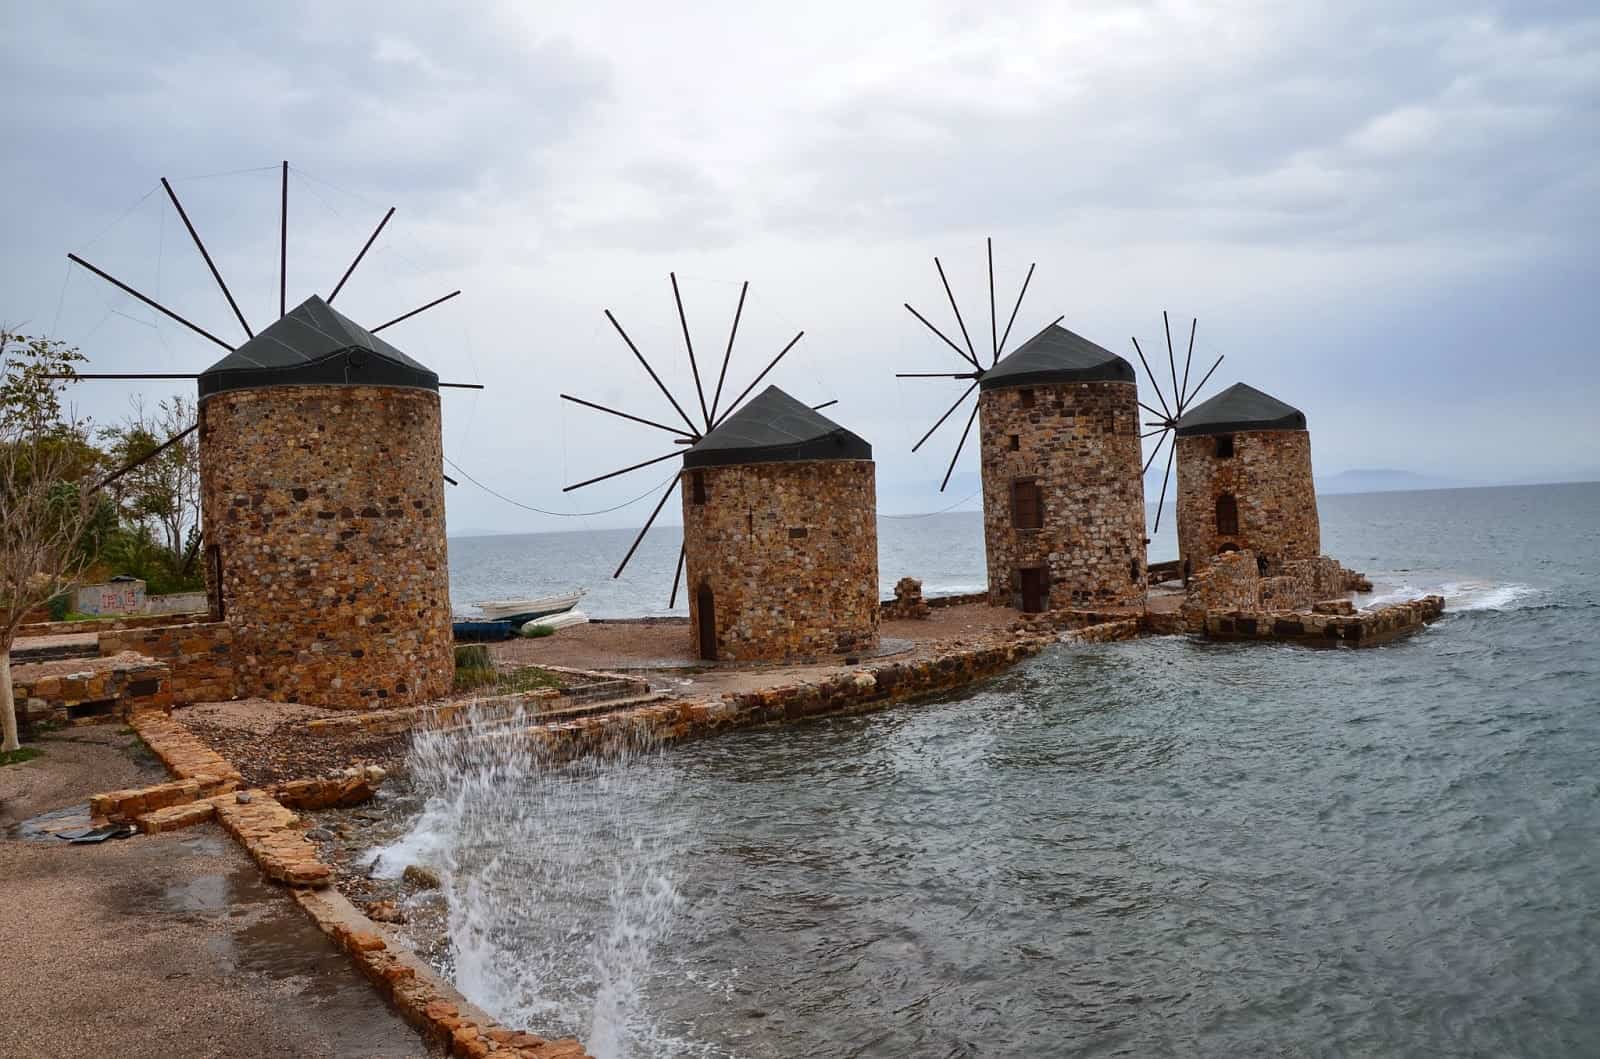 Windmills in Chora, Chios, Greece